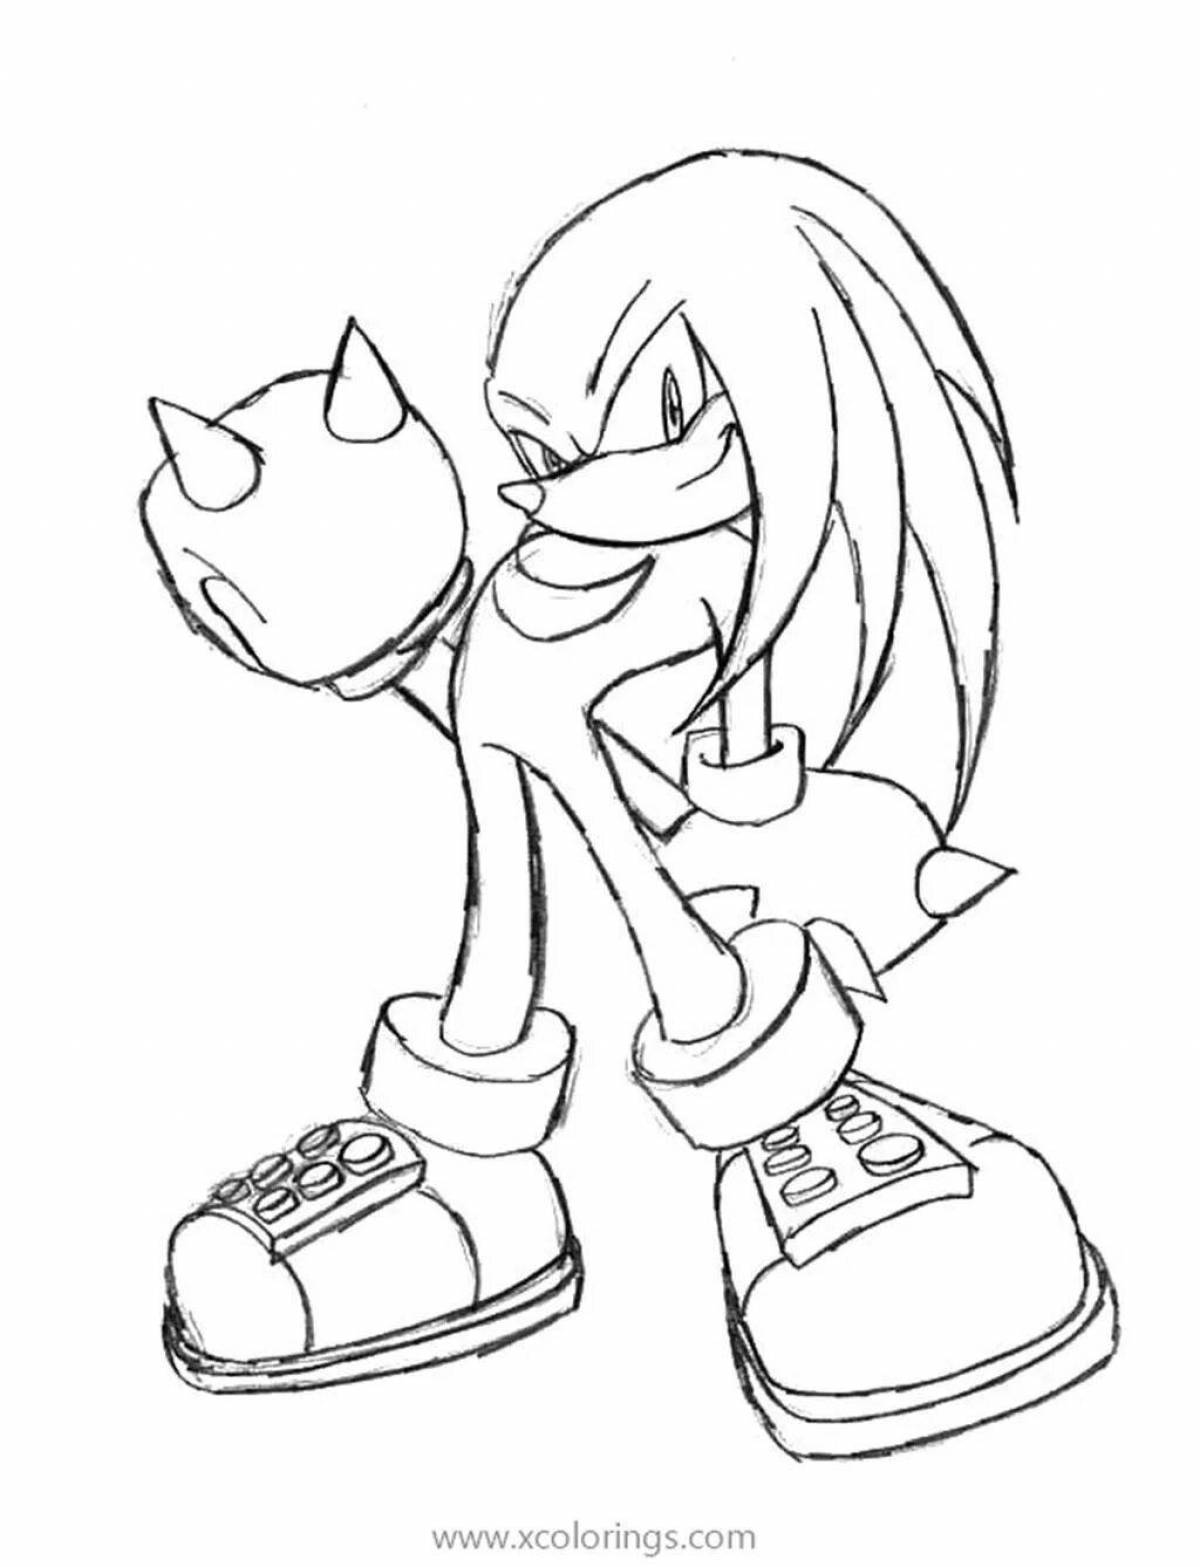 Coloring live echidna knuckles